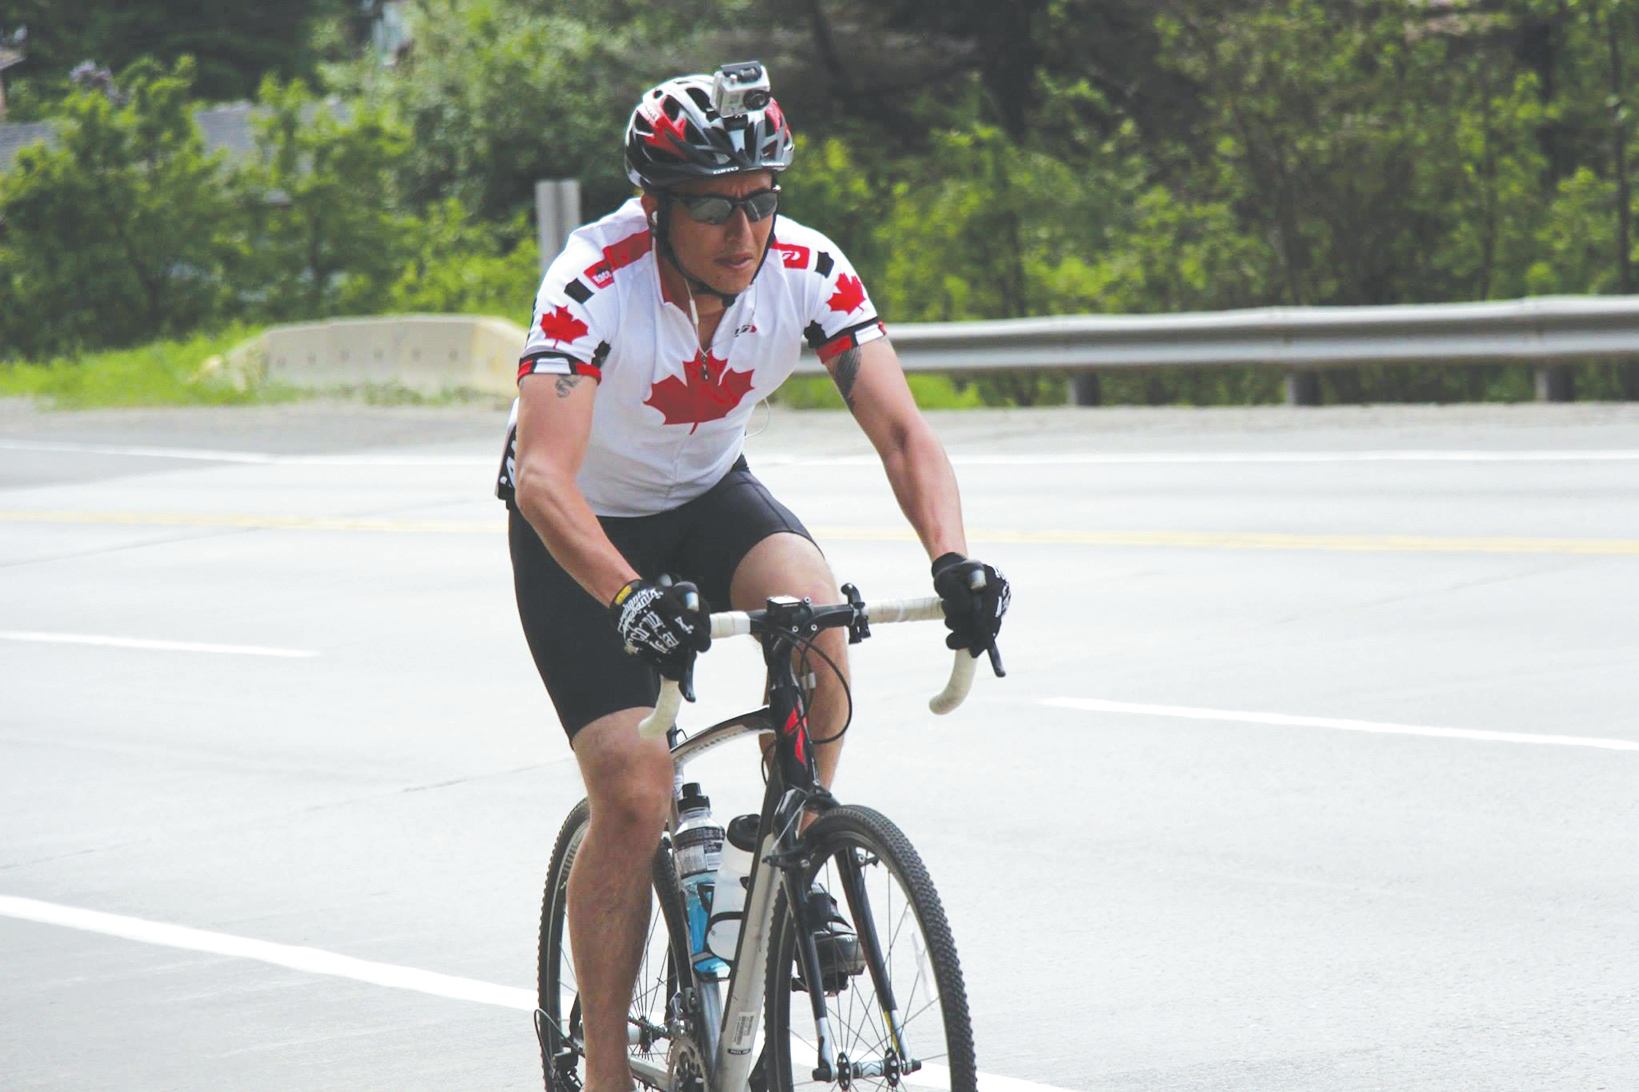 MOVING FORWARD - Chris Cull is a former opioid addict who decided to ride his bicycle accross Canada to examine the presence of opioids and opioid abuse as it ranged from province to province. His journey included hundreds of interviews ranging from former and current addicts to medical professionals and more.